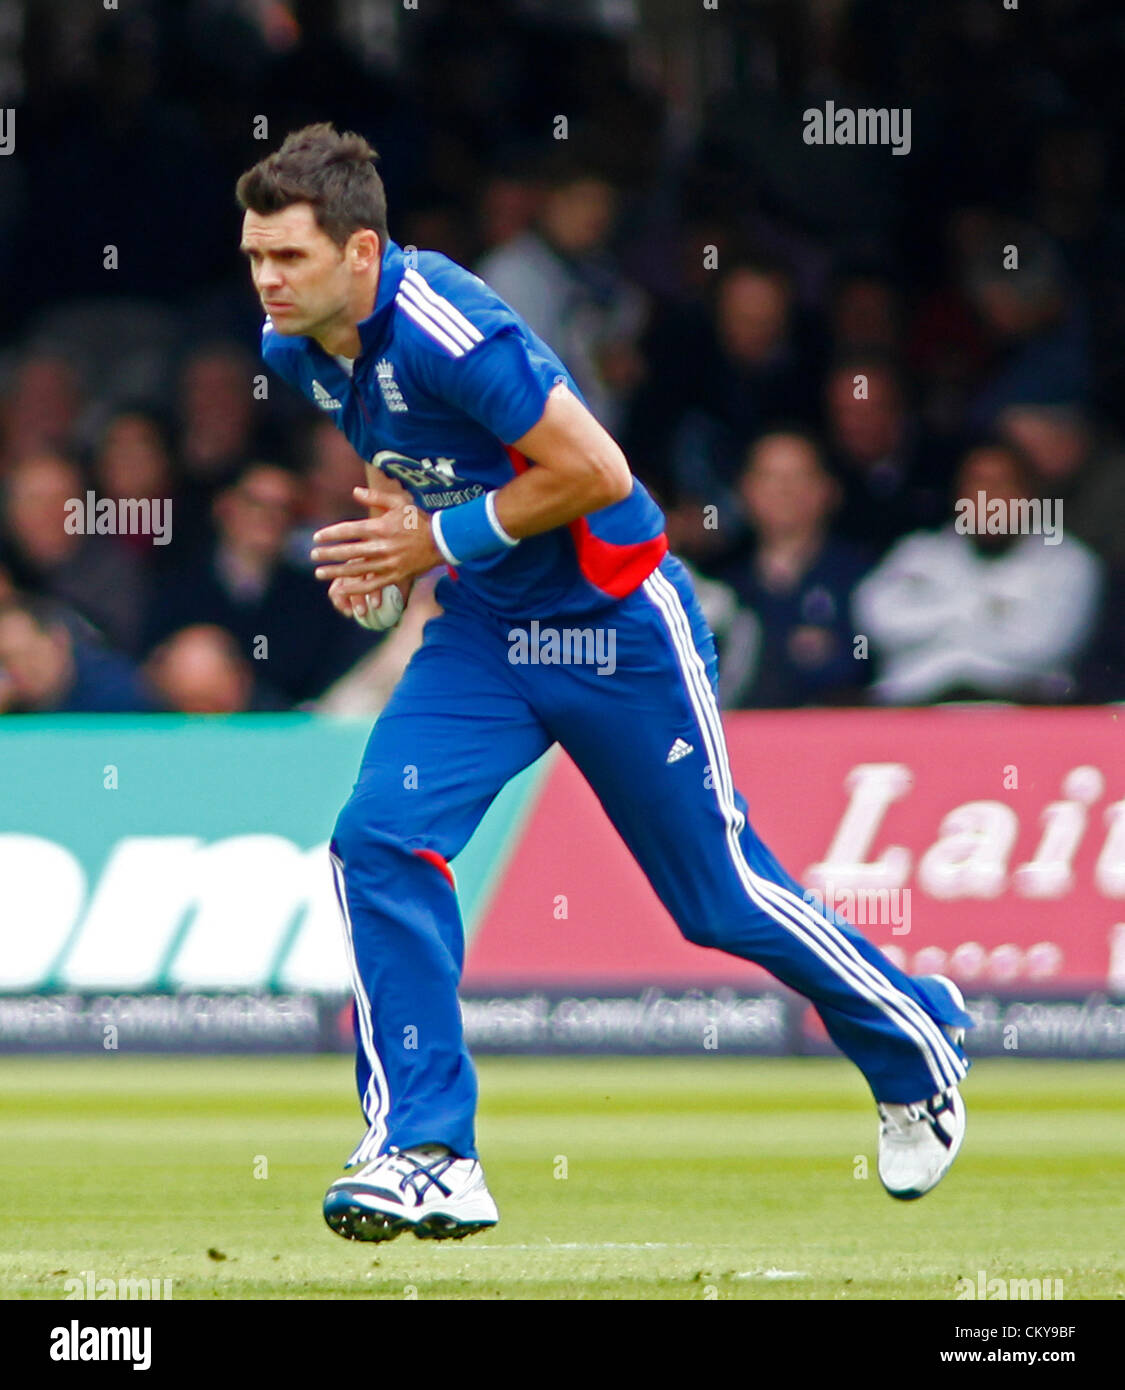 02/09/2012 London, England. England's James Anderson during the 3rd Nat West one day international cricket match between  England and South Africa and played at Lords Cricket Ground: Mandatory credit: Mitchell Gunn Stock Photo